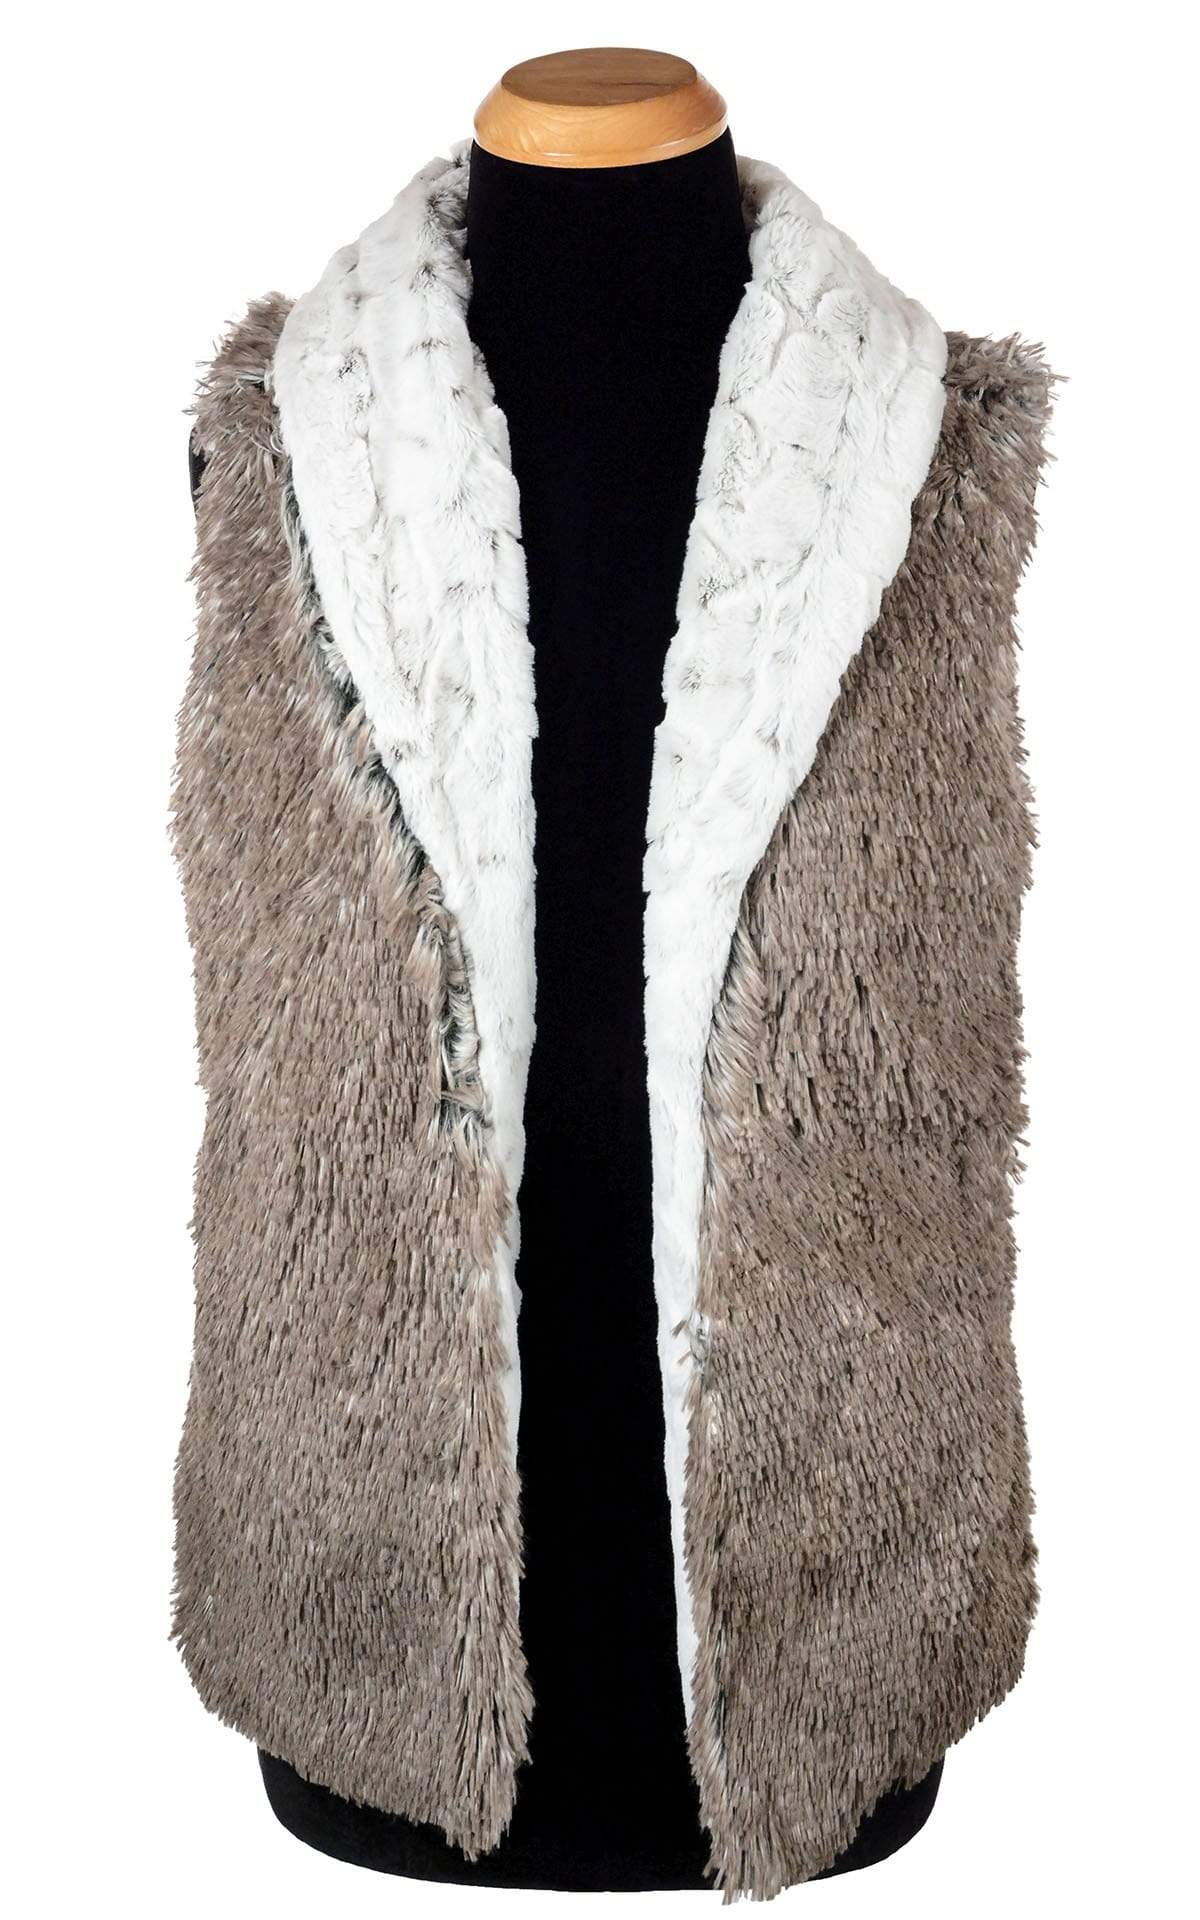  Shawl Collar Vest Reversed | Winter Frost Faux Fur with Arctic Fox Long Hair Faux Fur | By Pandemonium Millinery | Seattle WA US